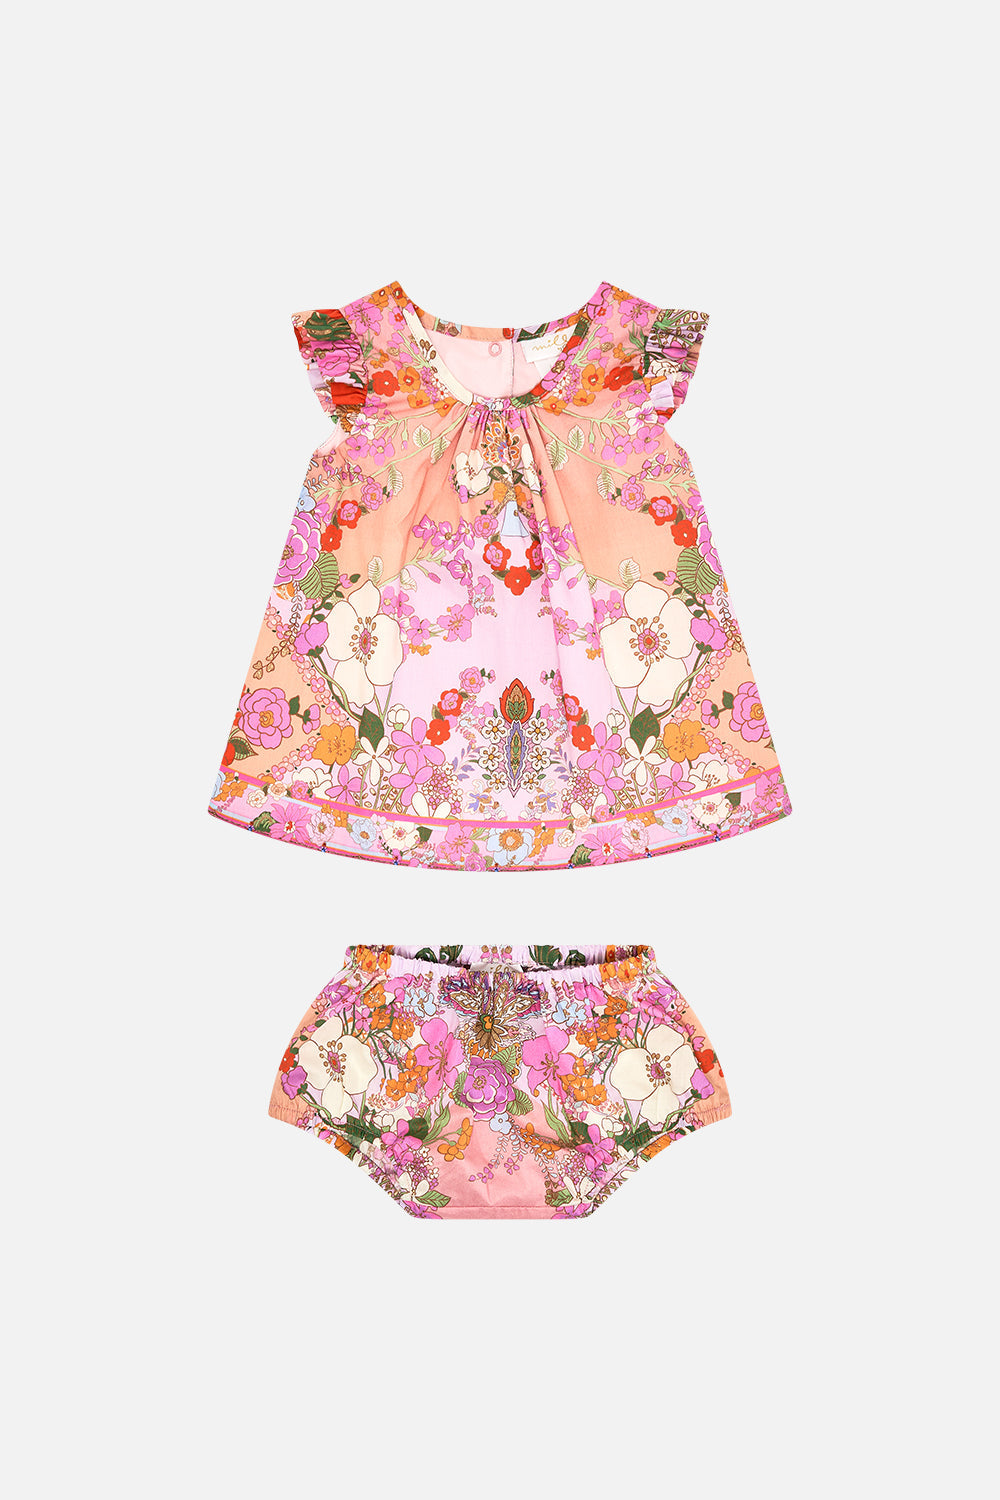 Milla by CAMILLA babies bloomer set in pink floral print Clever Clogs Print 